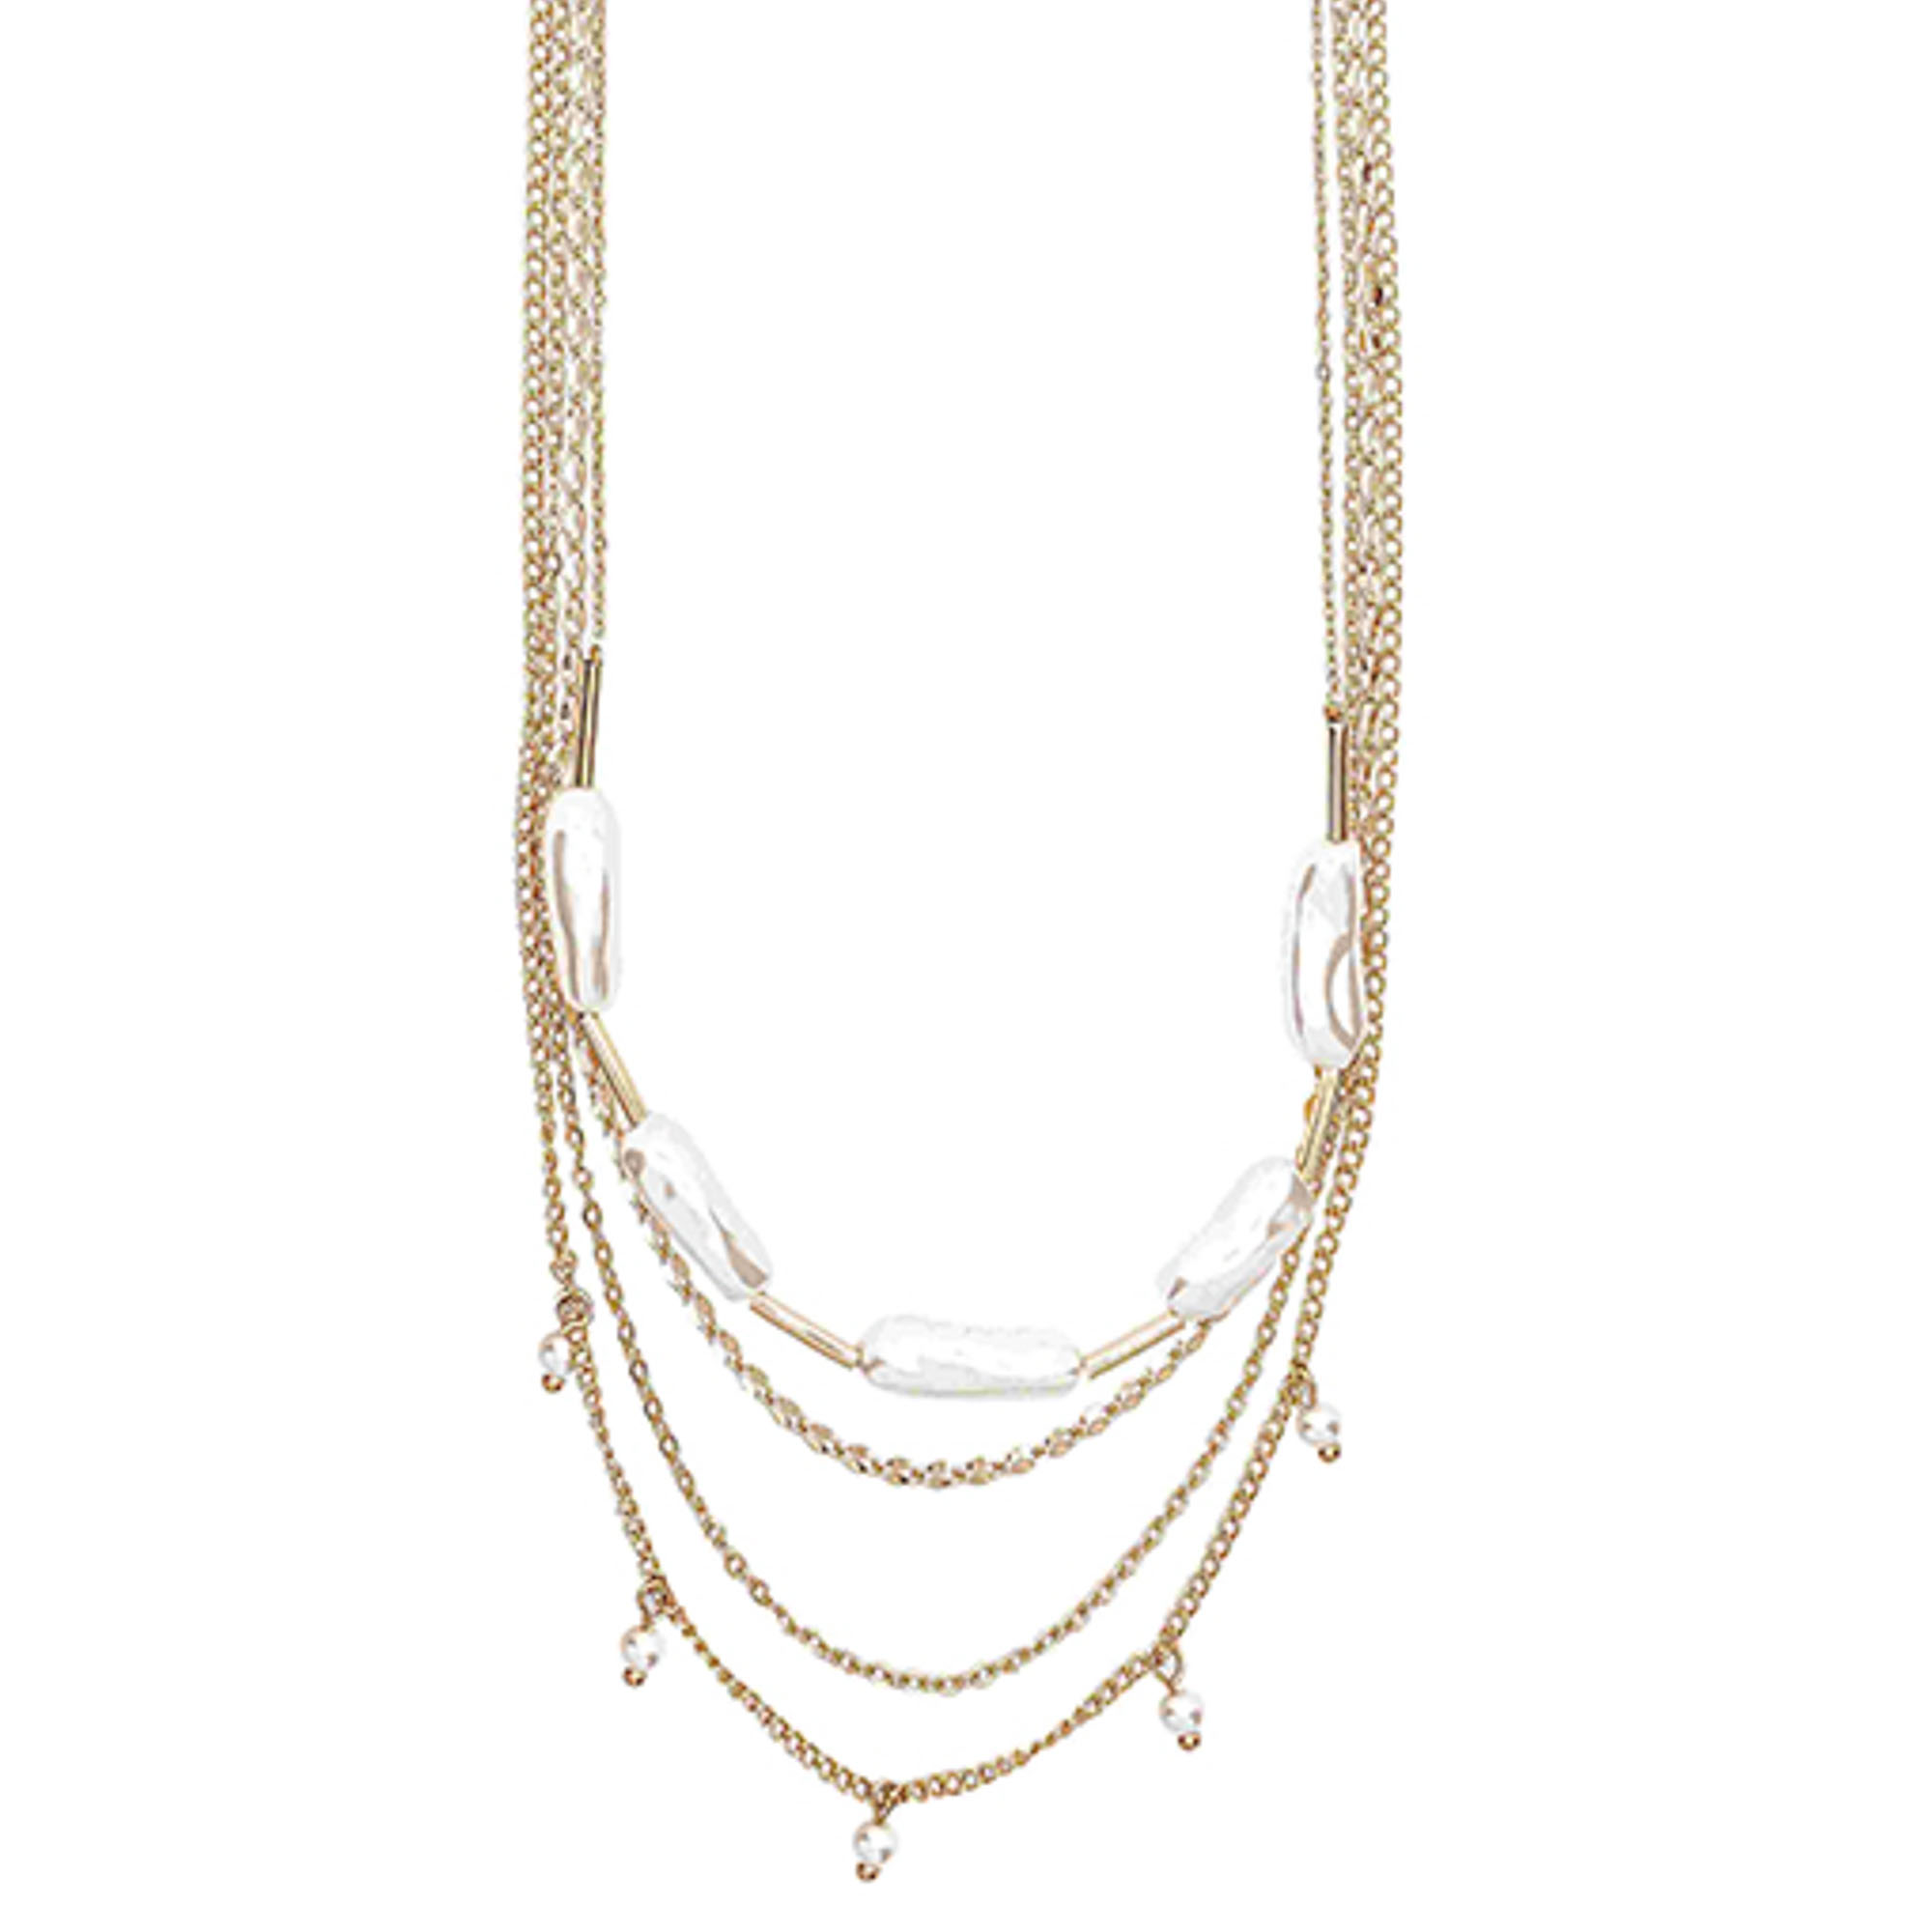 4 LAYERED METAL CHAIN PEARL NECKLACE